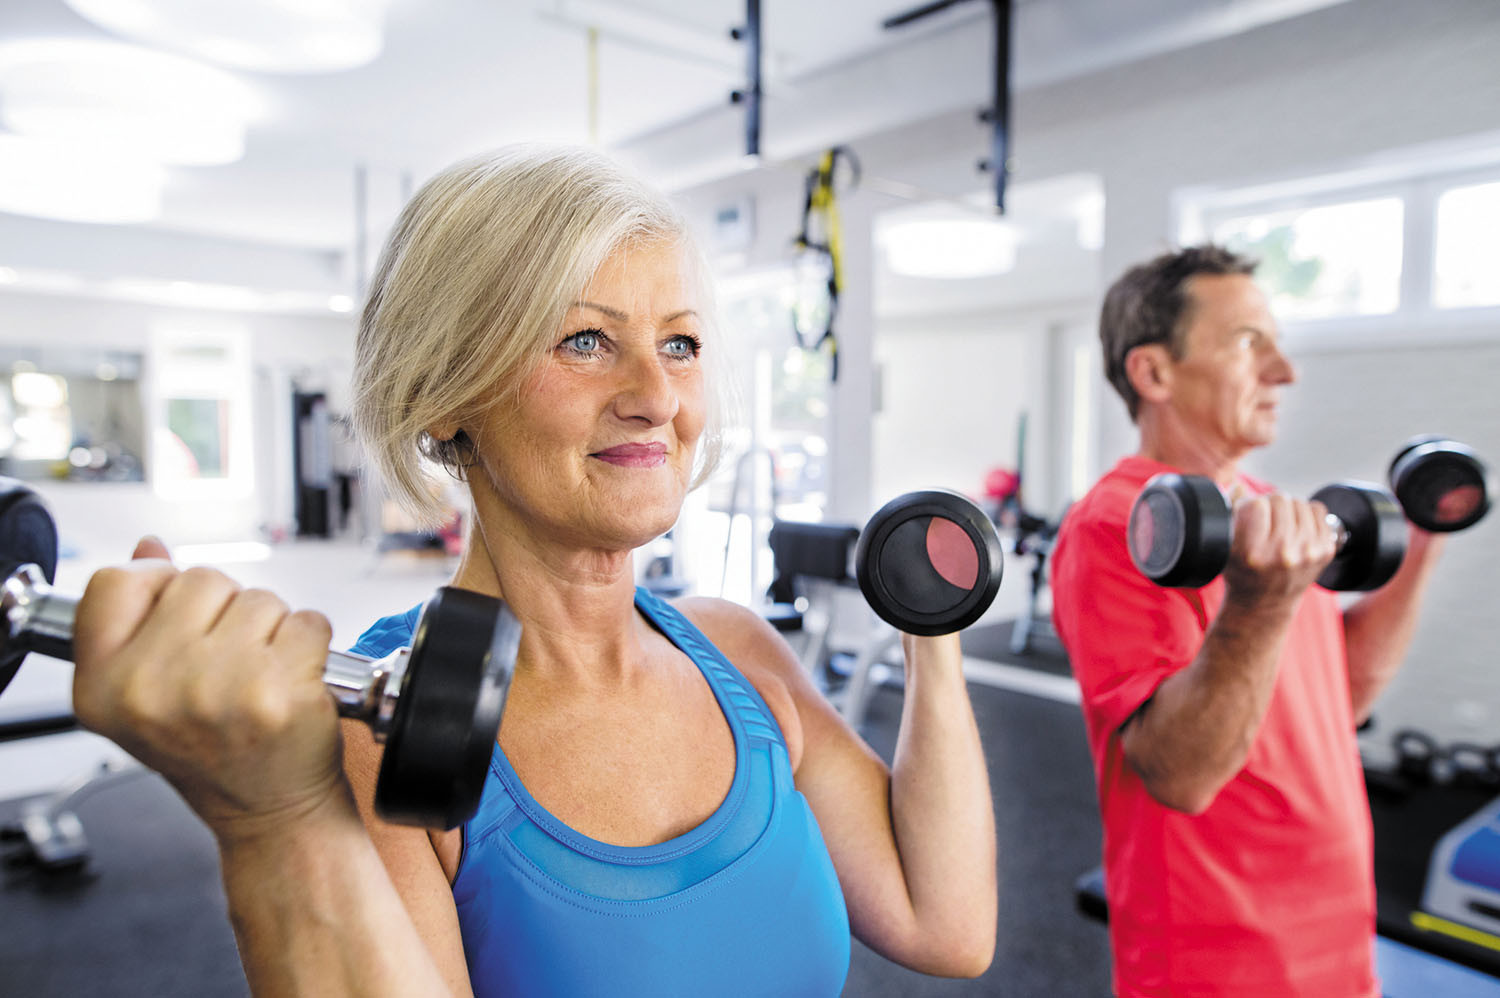 photo of a mature woman and man working out in a gym, each is doing exercises with hand weights